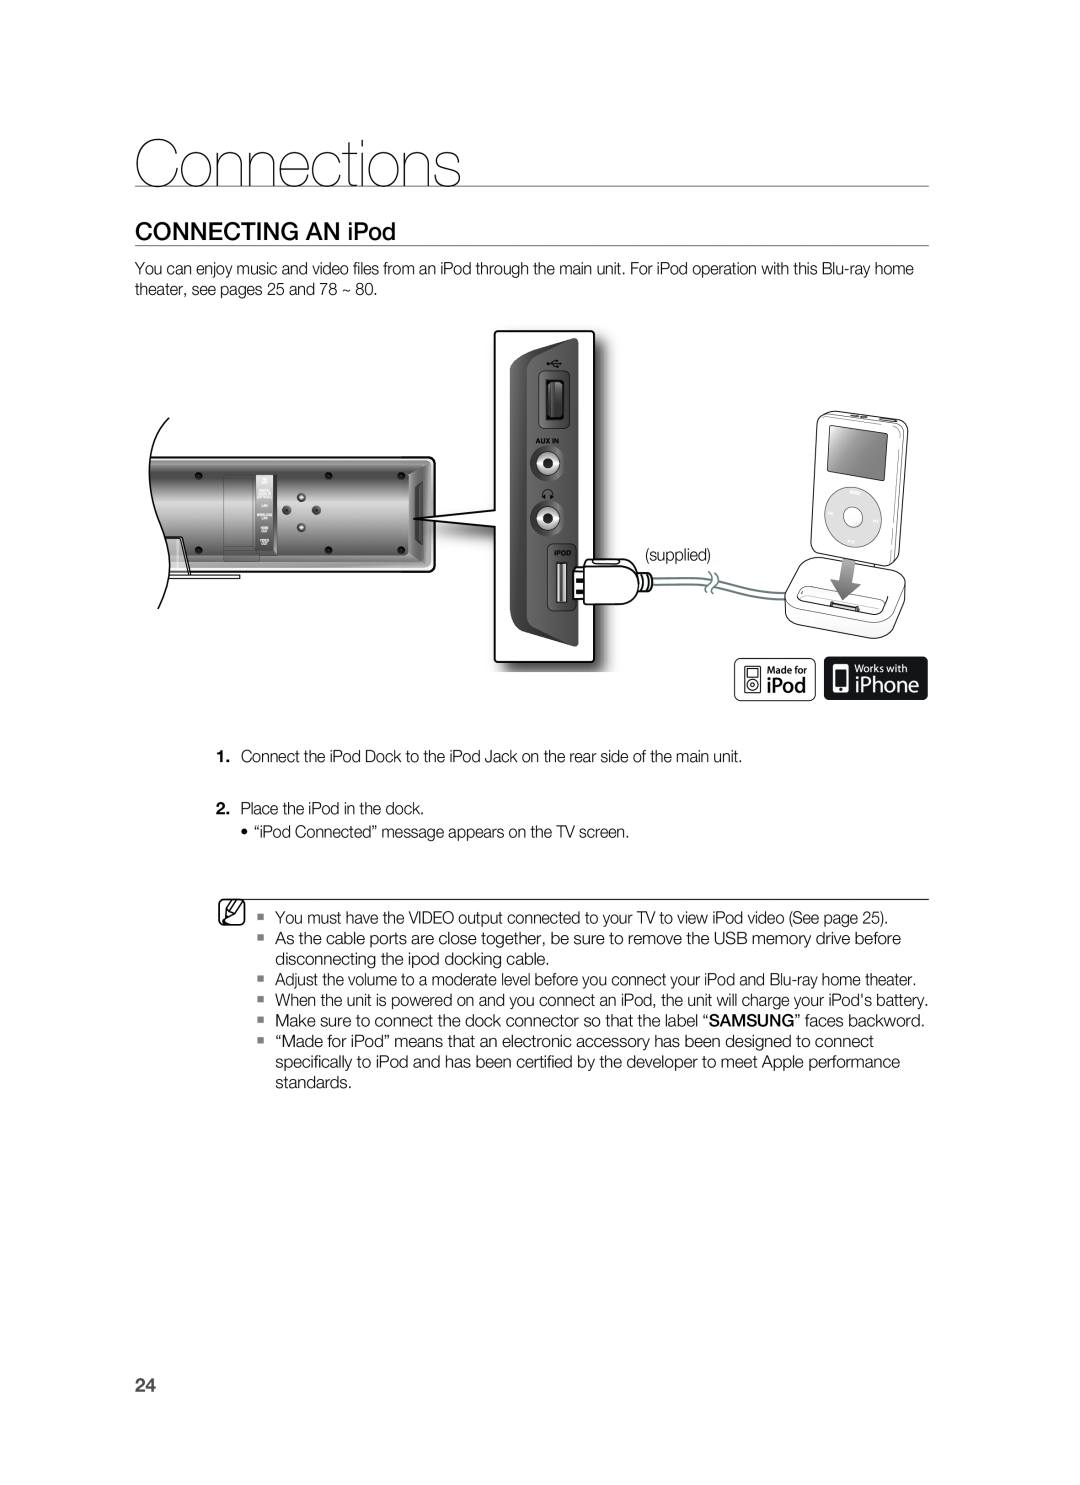 Samsung HT-BD8200 user manual CONNECTING AN iPod, Connections 